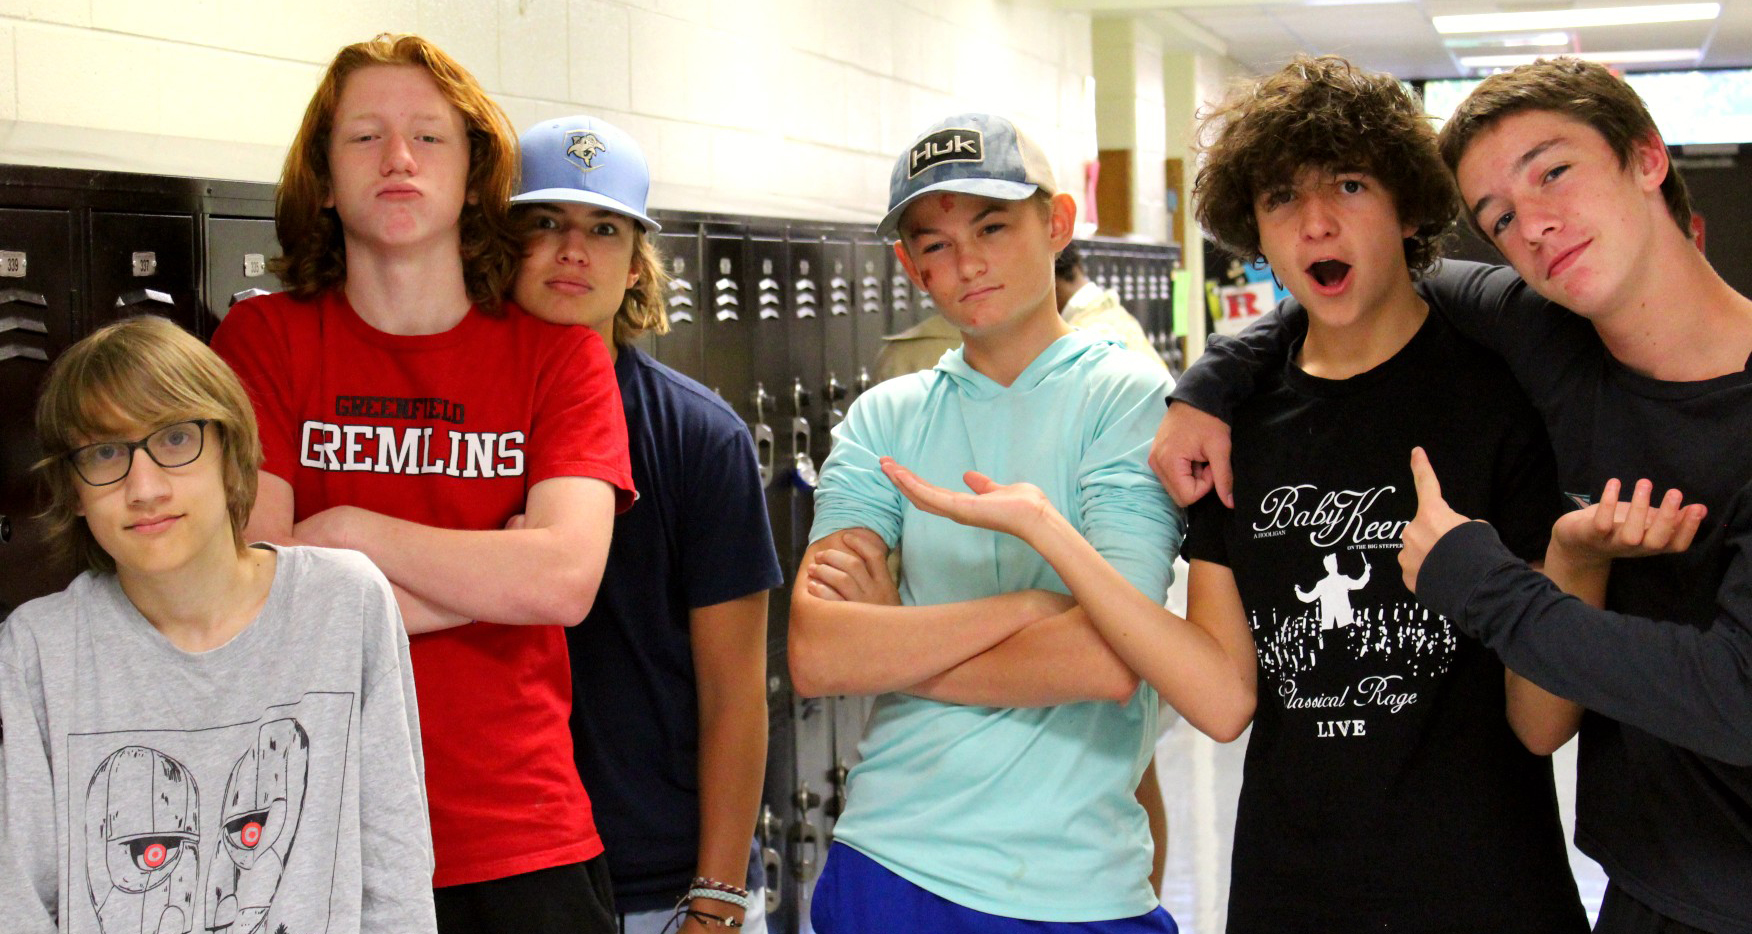 Six boys pose for a photo in the hallway